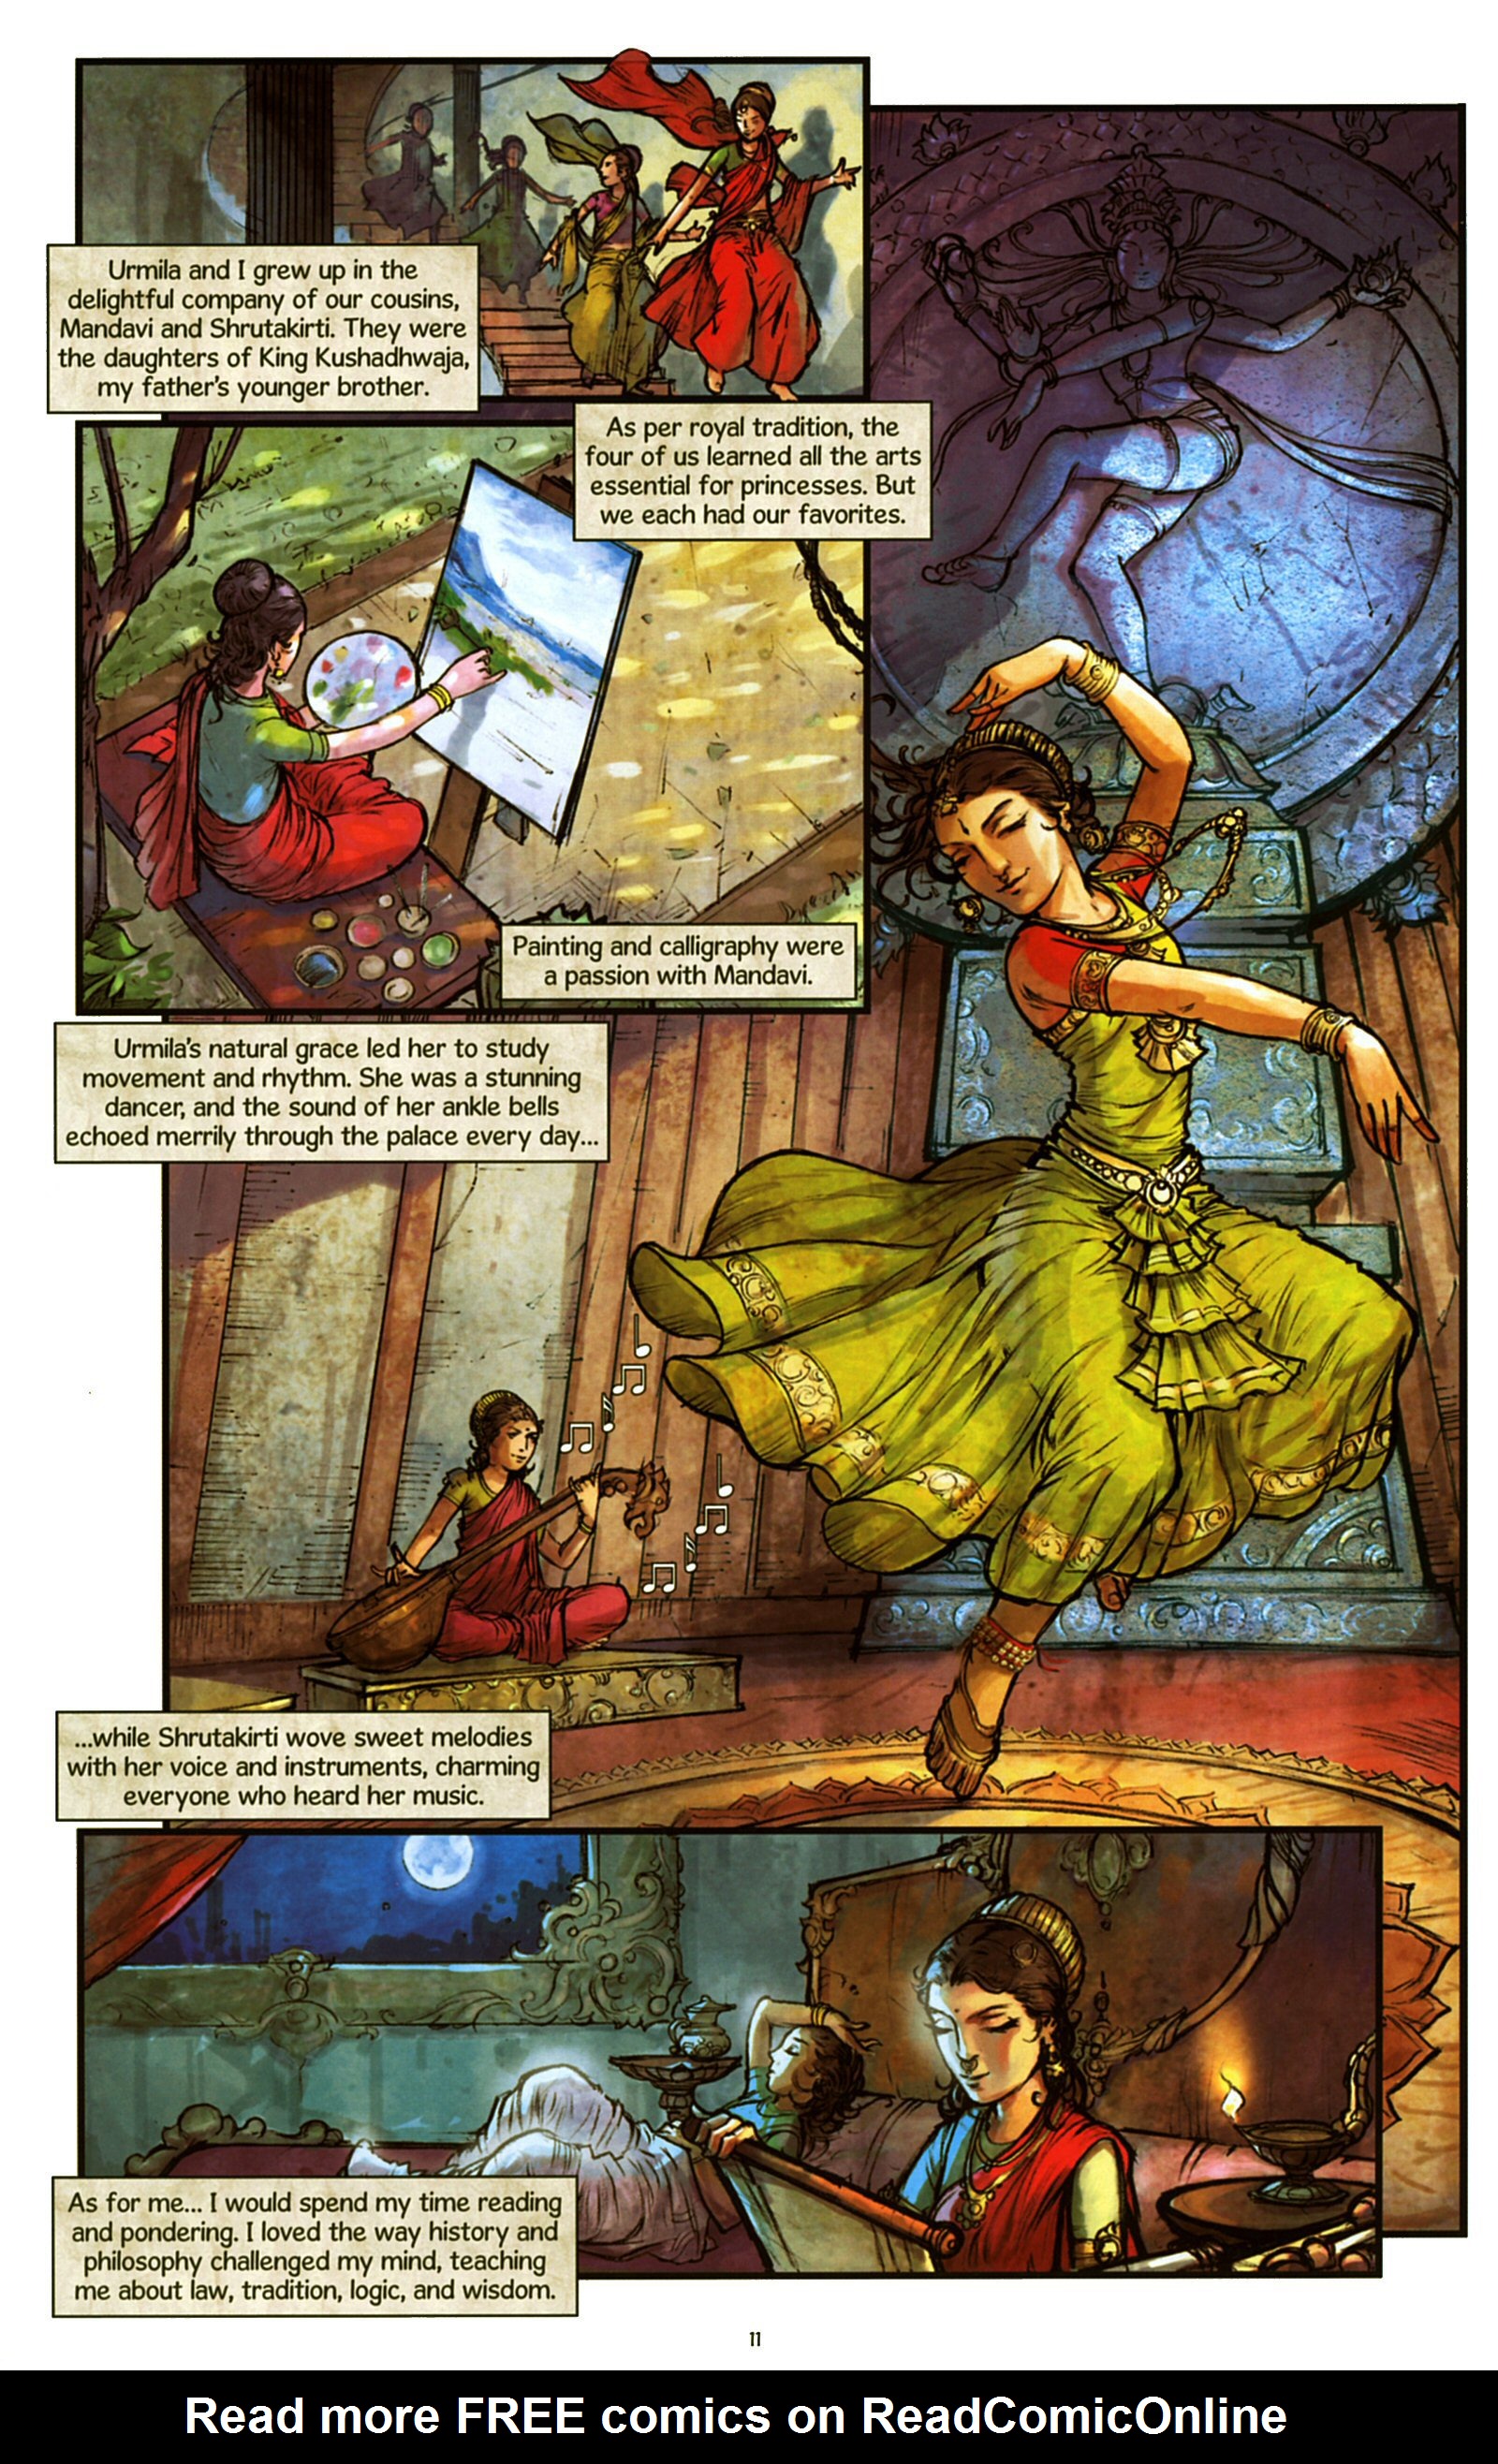 Read online Sita Daughter of the Earth comic -  Issue # TPB - 15